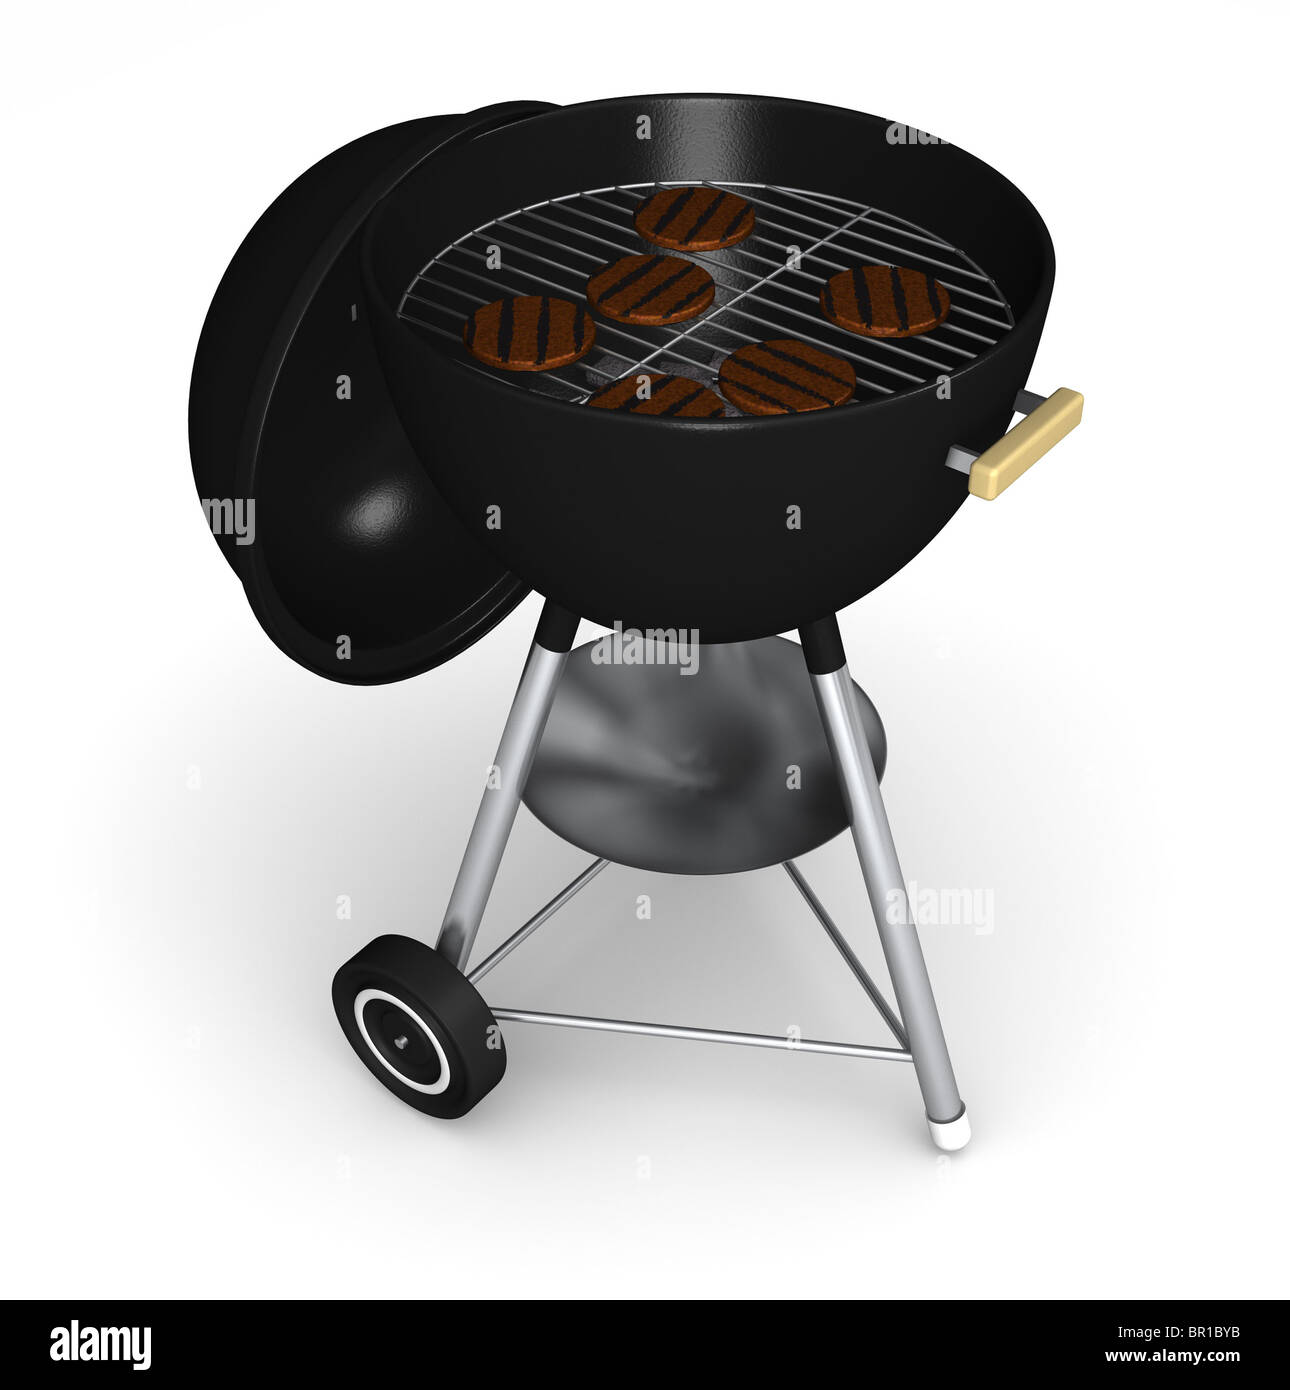 https://c8.alamy.com/comp/BR1BYB/a-portable-barbecue-grill-with-burgers-grilling-isolated-on-white-BR1BYB.jpg